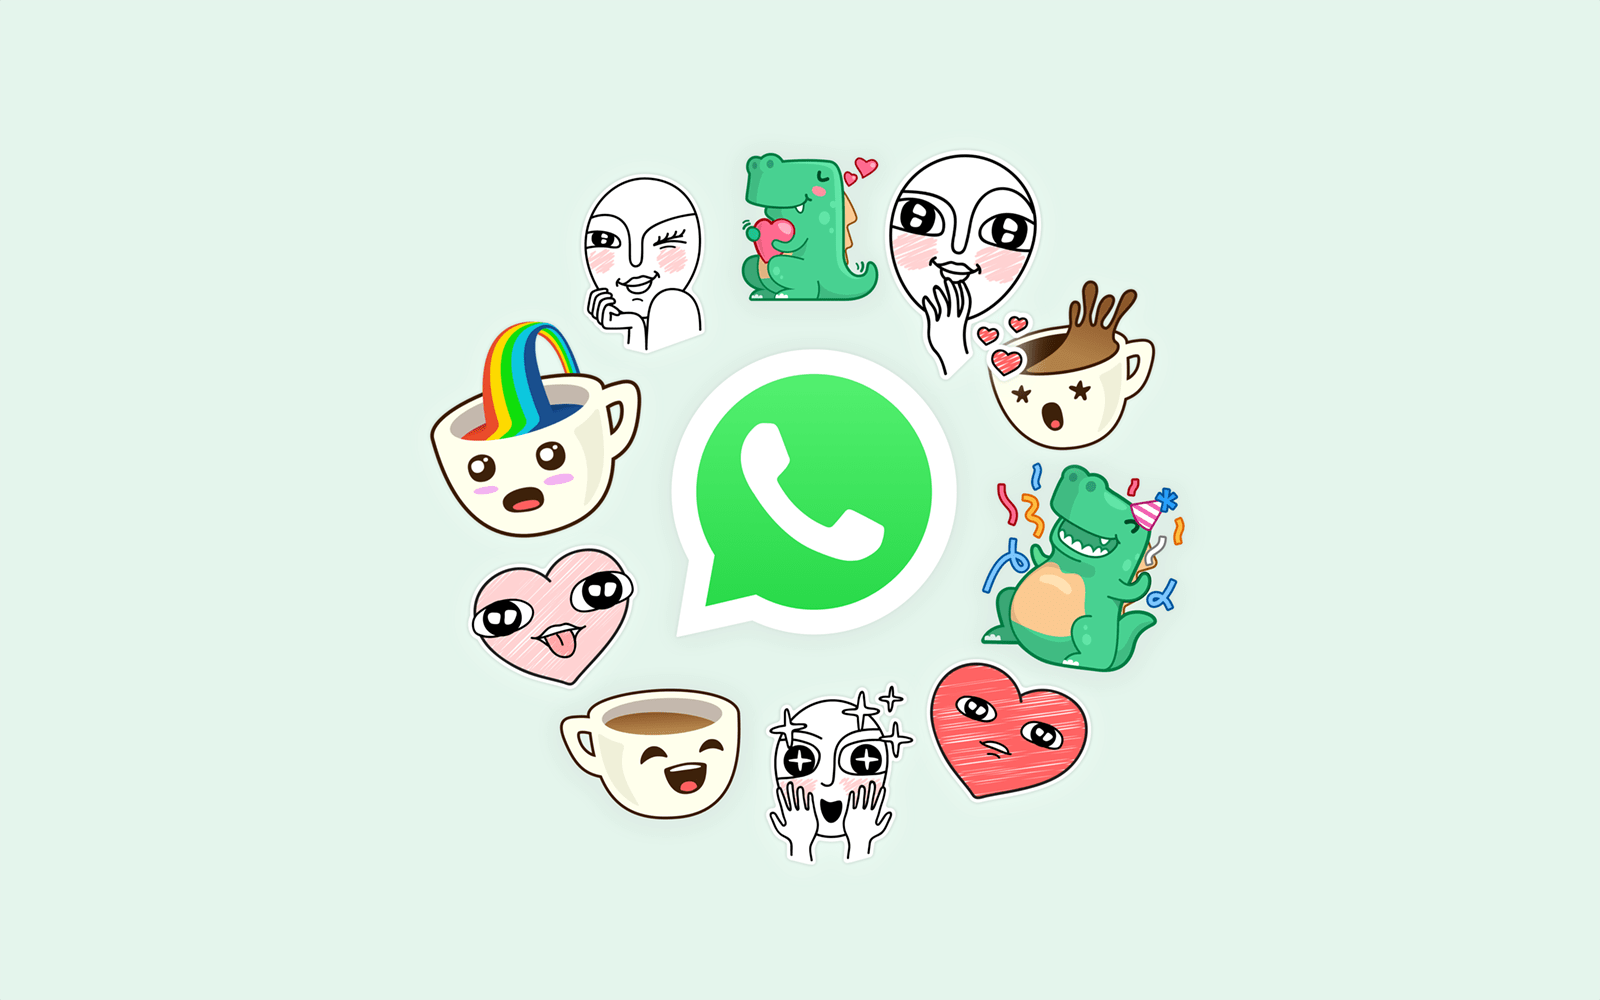 Create Your Own WhatsApp Stickers, Here's How - PC